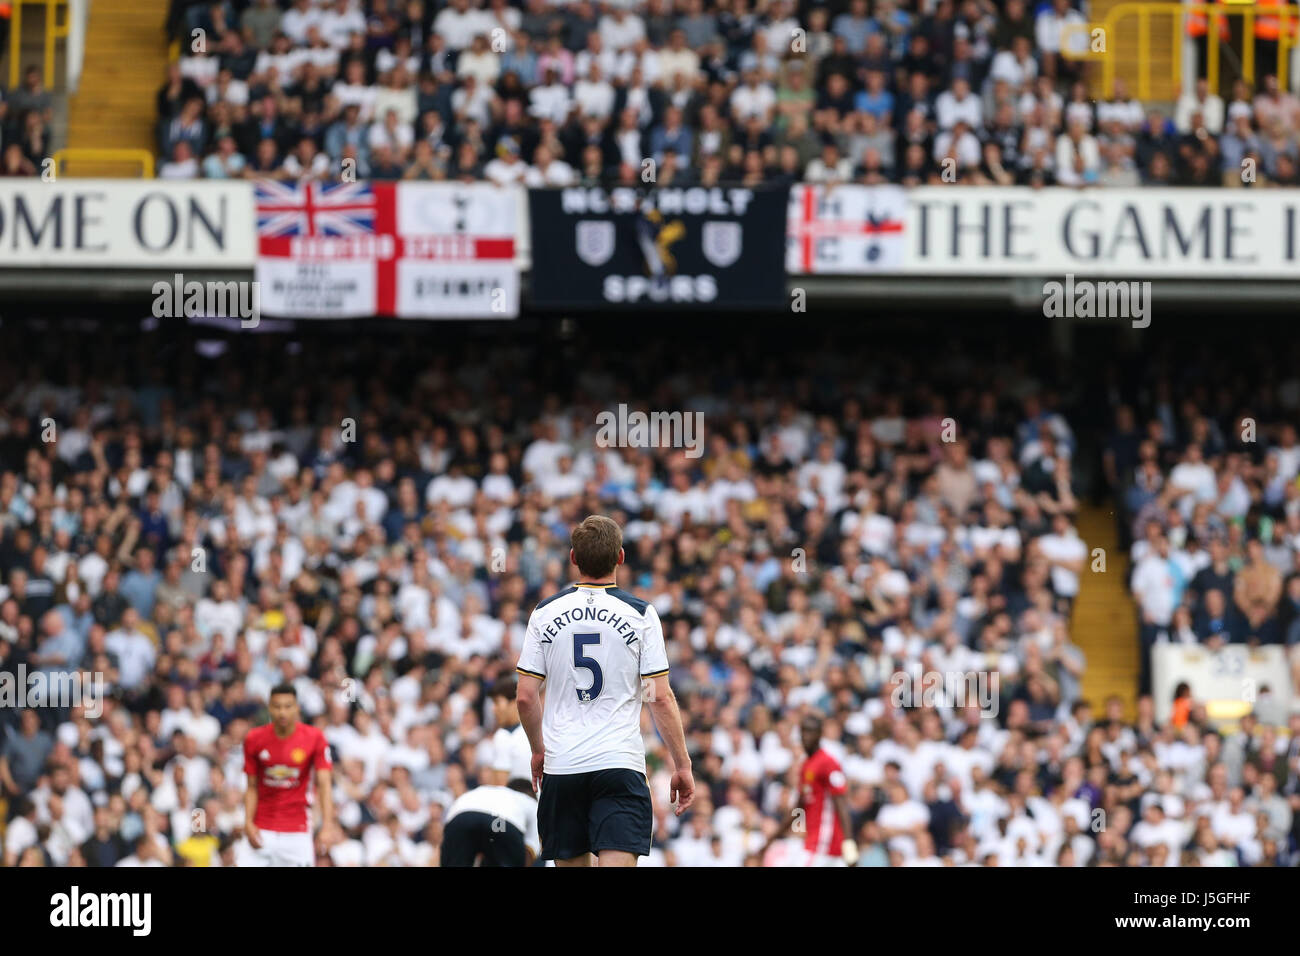 Jan Vertonghen of Tottenham Hotspur during the Premier League match between Tottenham Hotspur and Manchester United at White Hart Lane in London. 14 May 2017 EDITORIAL USE ONLY . No merchandising. For Football images FA and Premier League restrictions apply inc. no internet/mobile usage without FAPL license - for details contact Football Dataco ARRON GENT/TELEPHOTO IMAGES Stock Photo